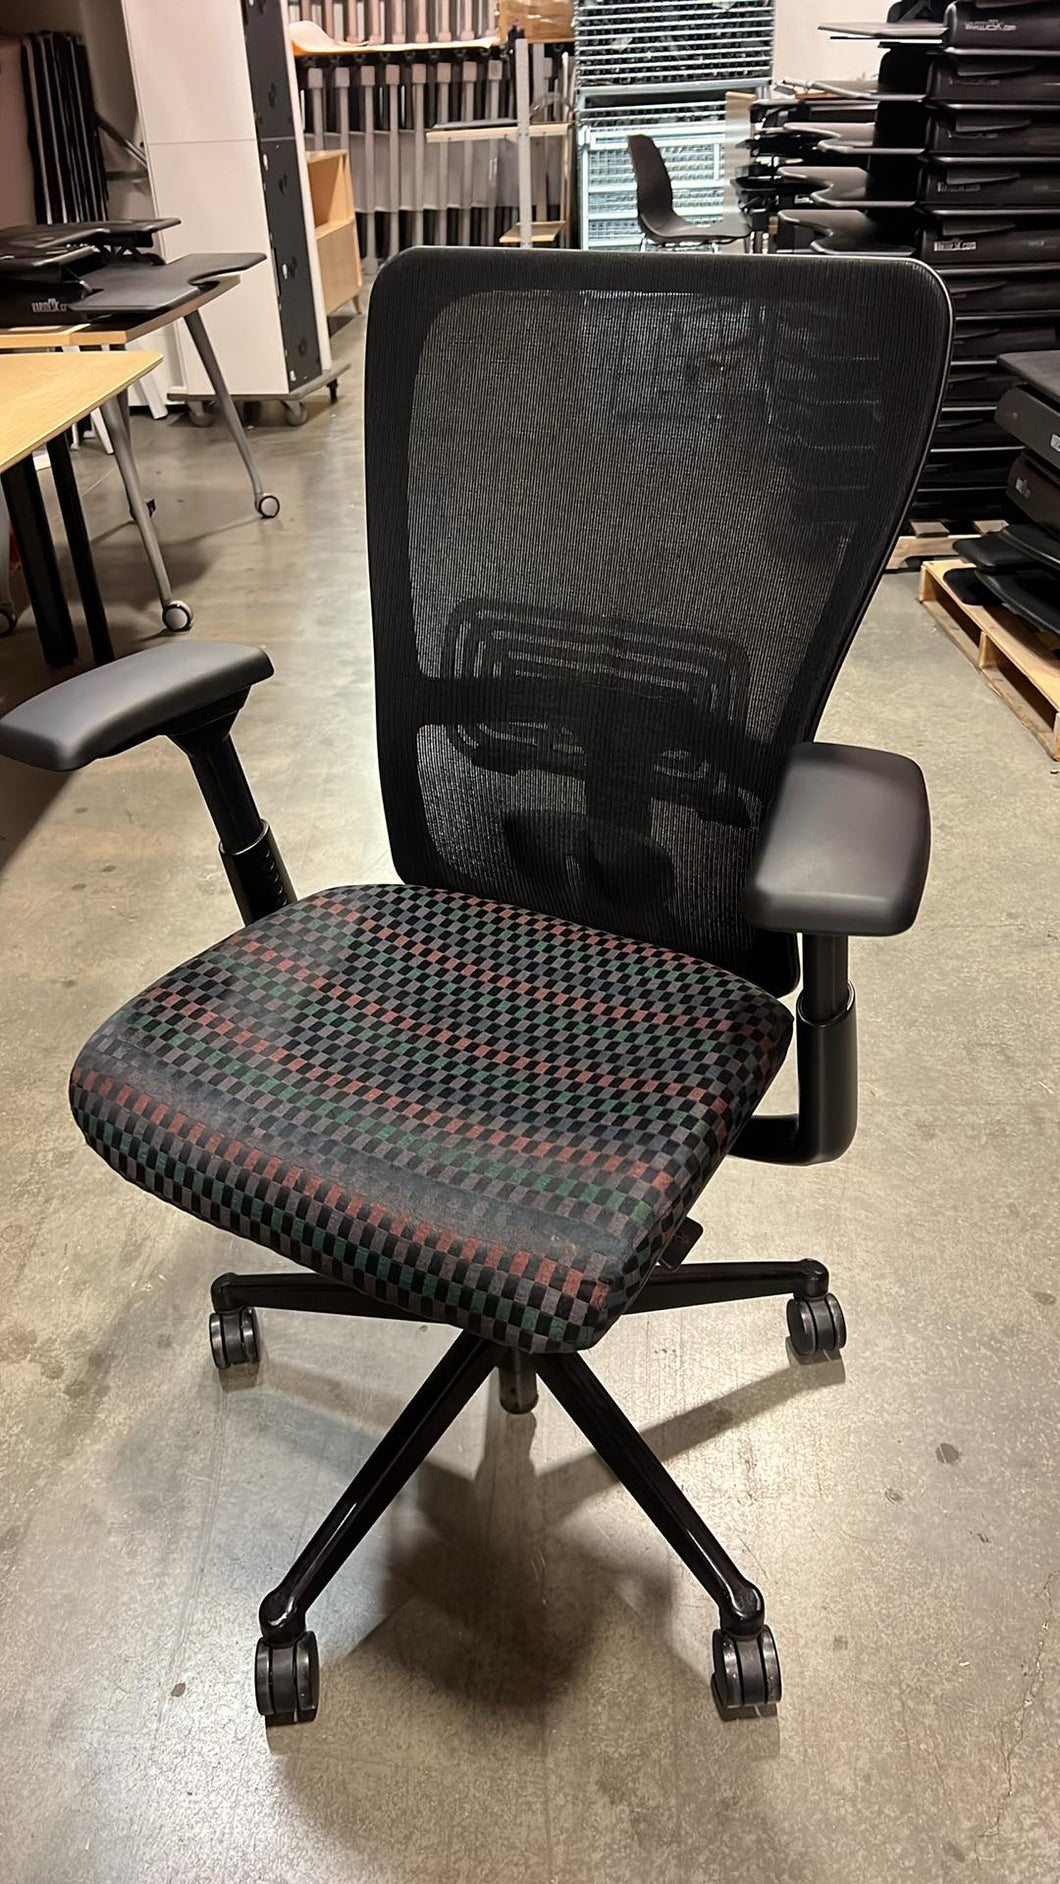 Used Fully Loaded Haworth Zody Ergonomic Office Chair